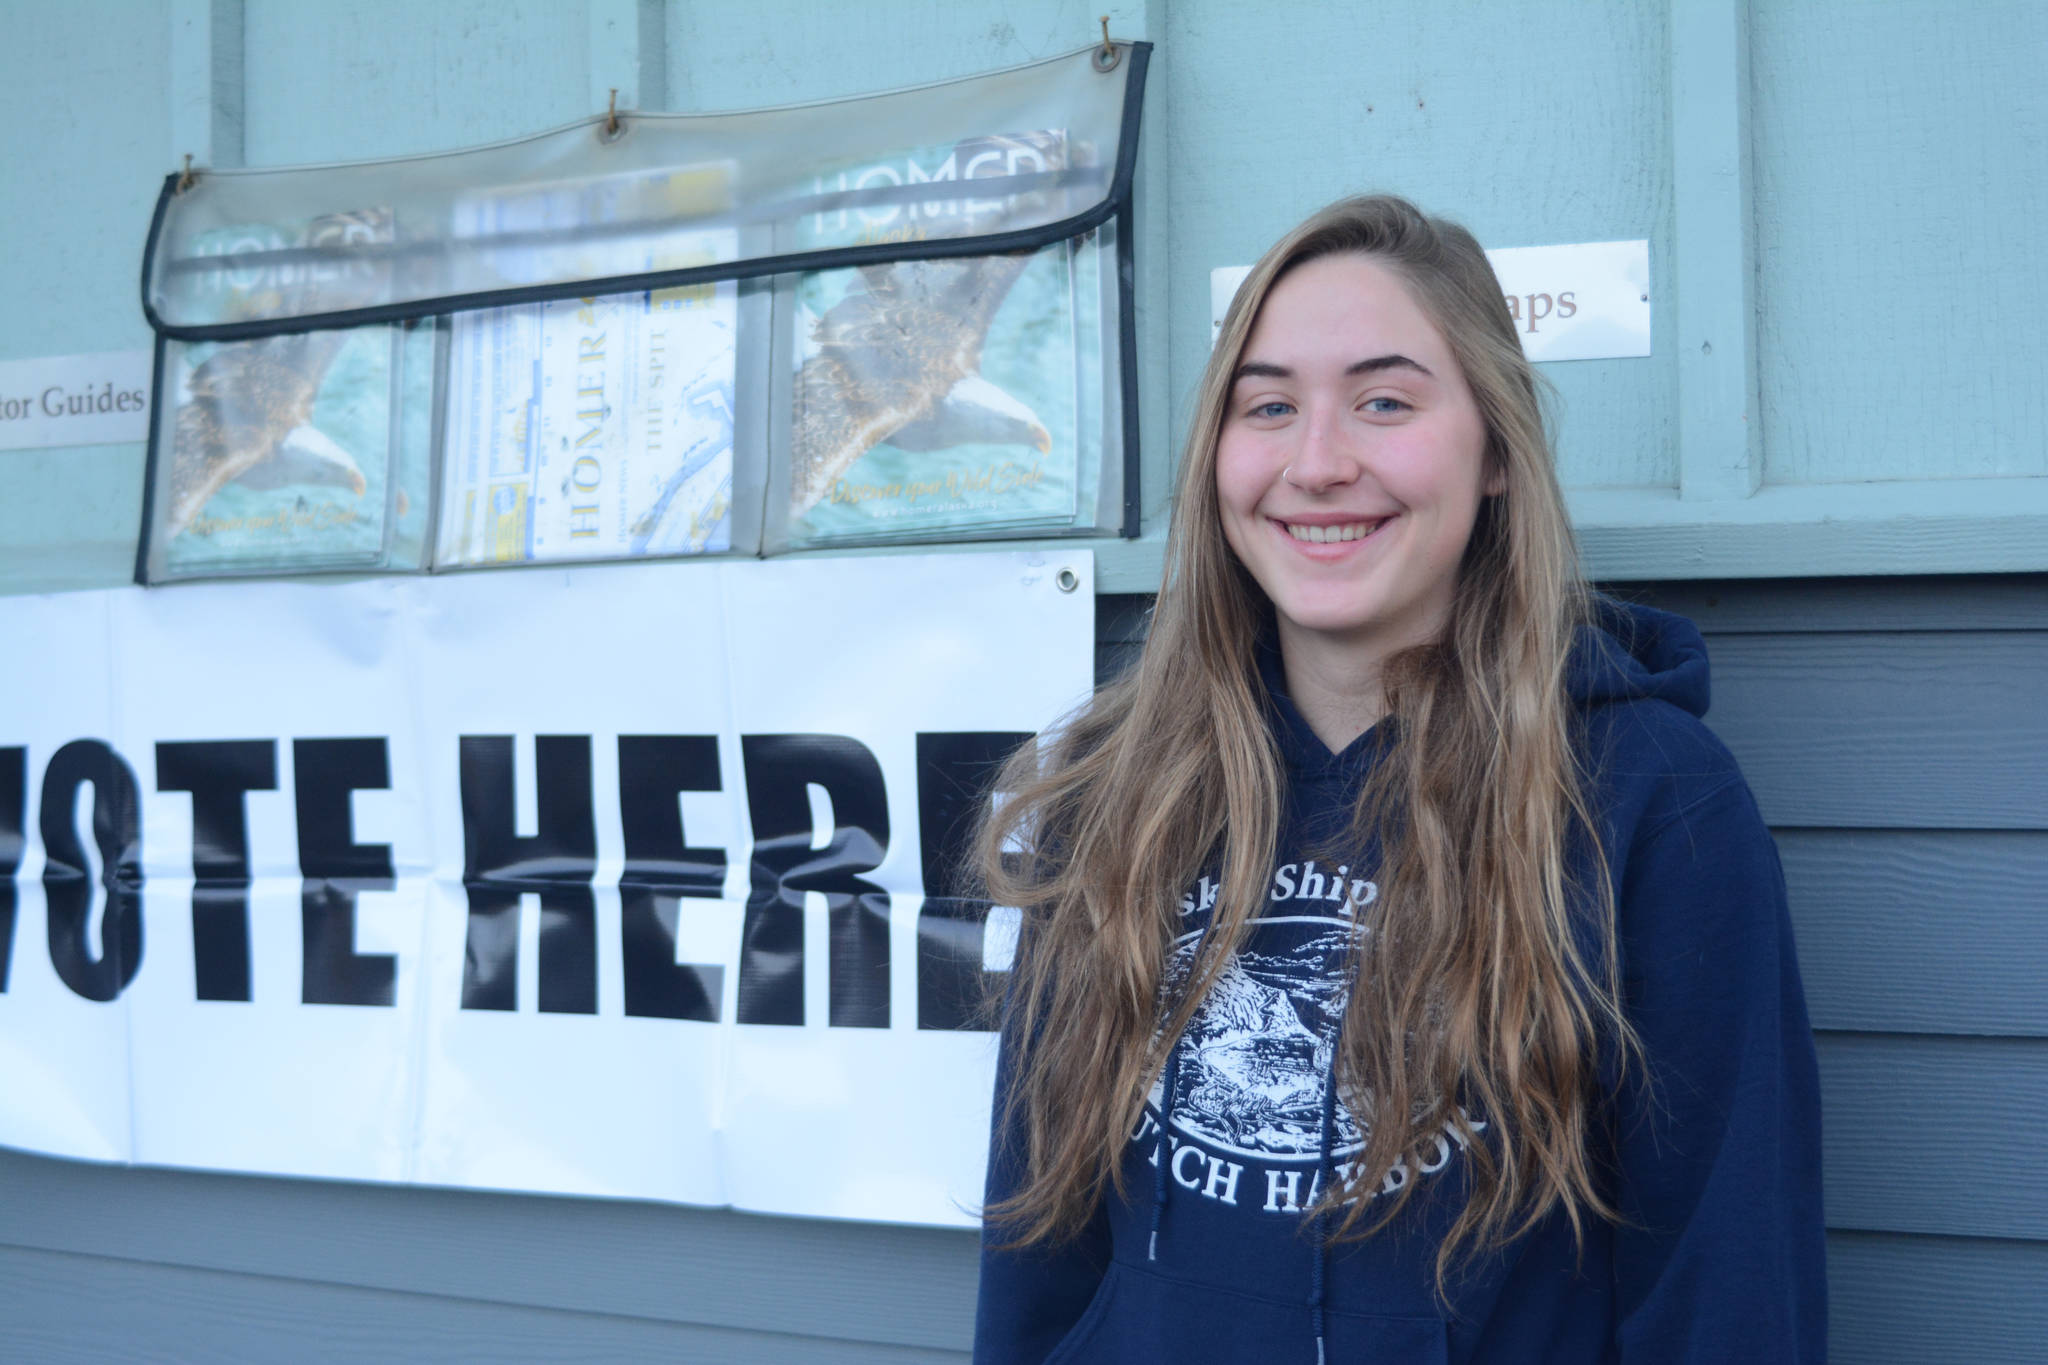 After voting in her first ever election, Brenna McCarron, 18, poses for a photo outside the Diamond Ridge Precinct at the Homer Chamber of Commerce and Visitor Center on Nov. 6, 2018, in Homer, Alaska. McCarron went to the polls with her father, Jim McCarron, who has been voting for 36 years. Her twin sister, Ali, also voted for the first time. They are both Homer High School seniors. (Photo by Michael Armstrong/Homer News)